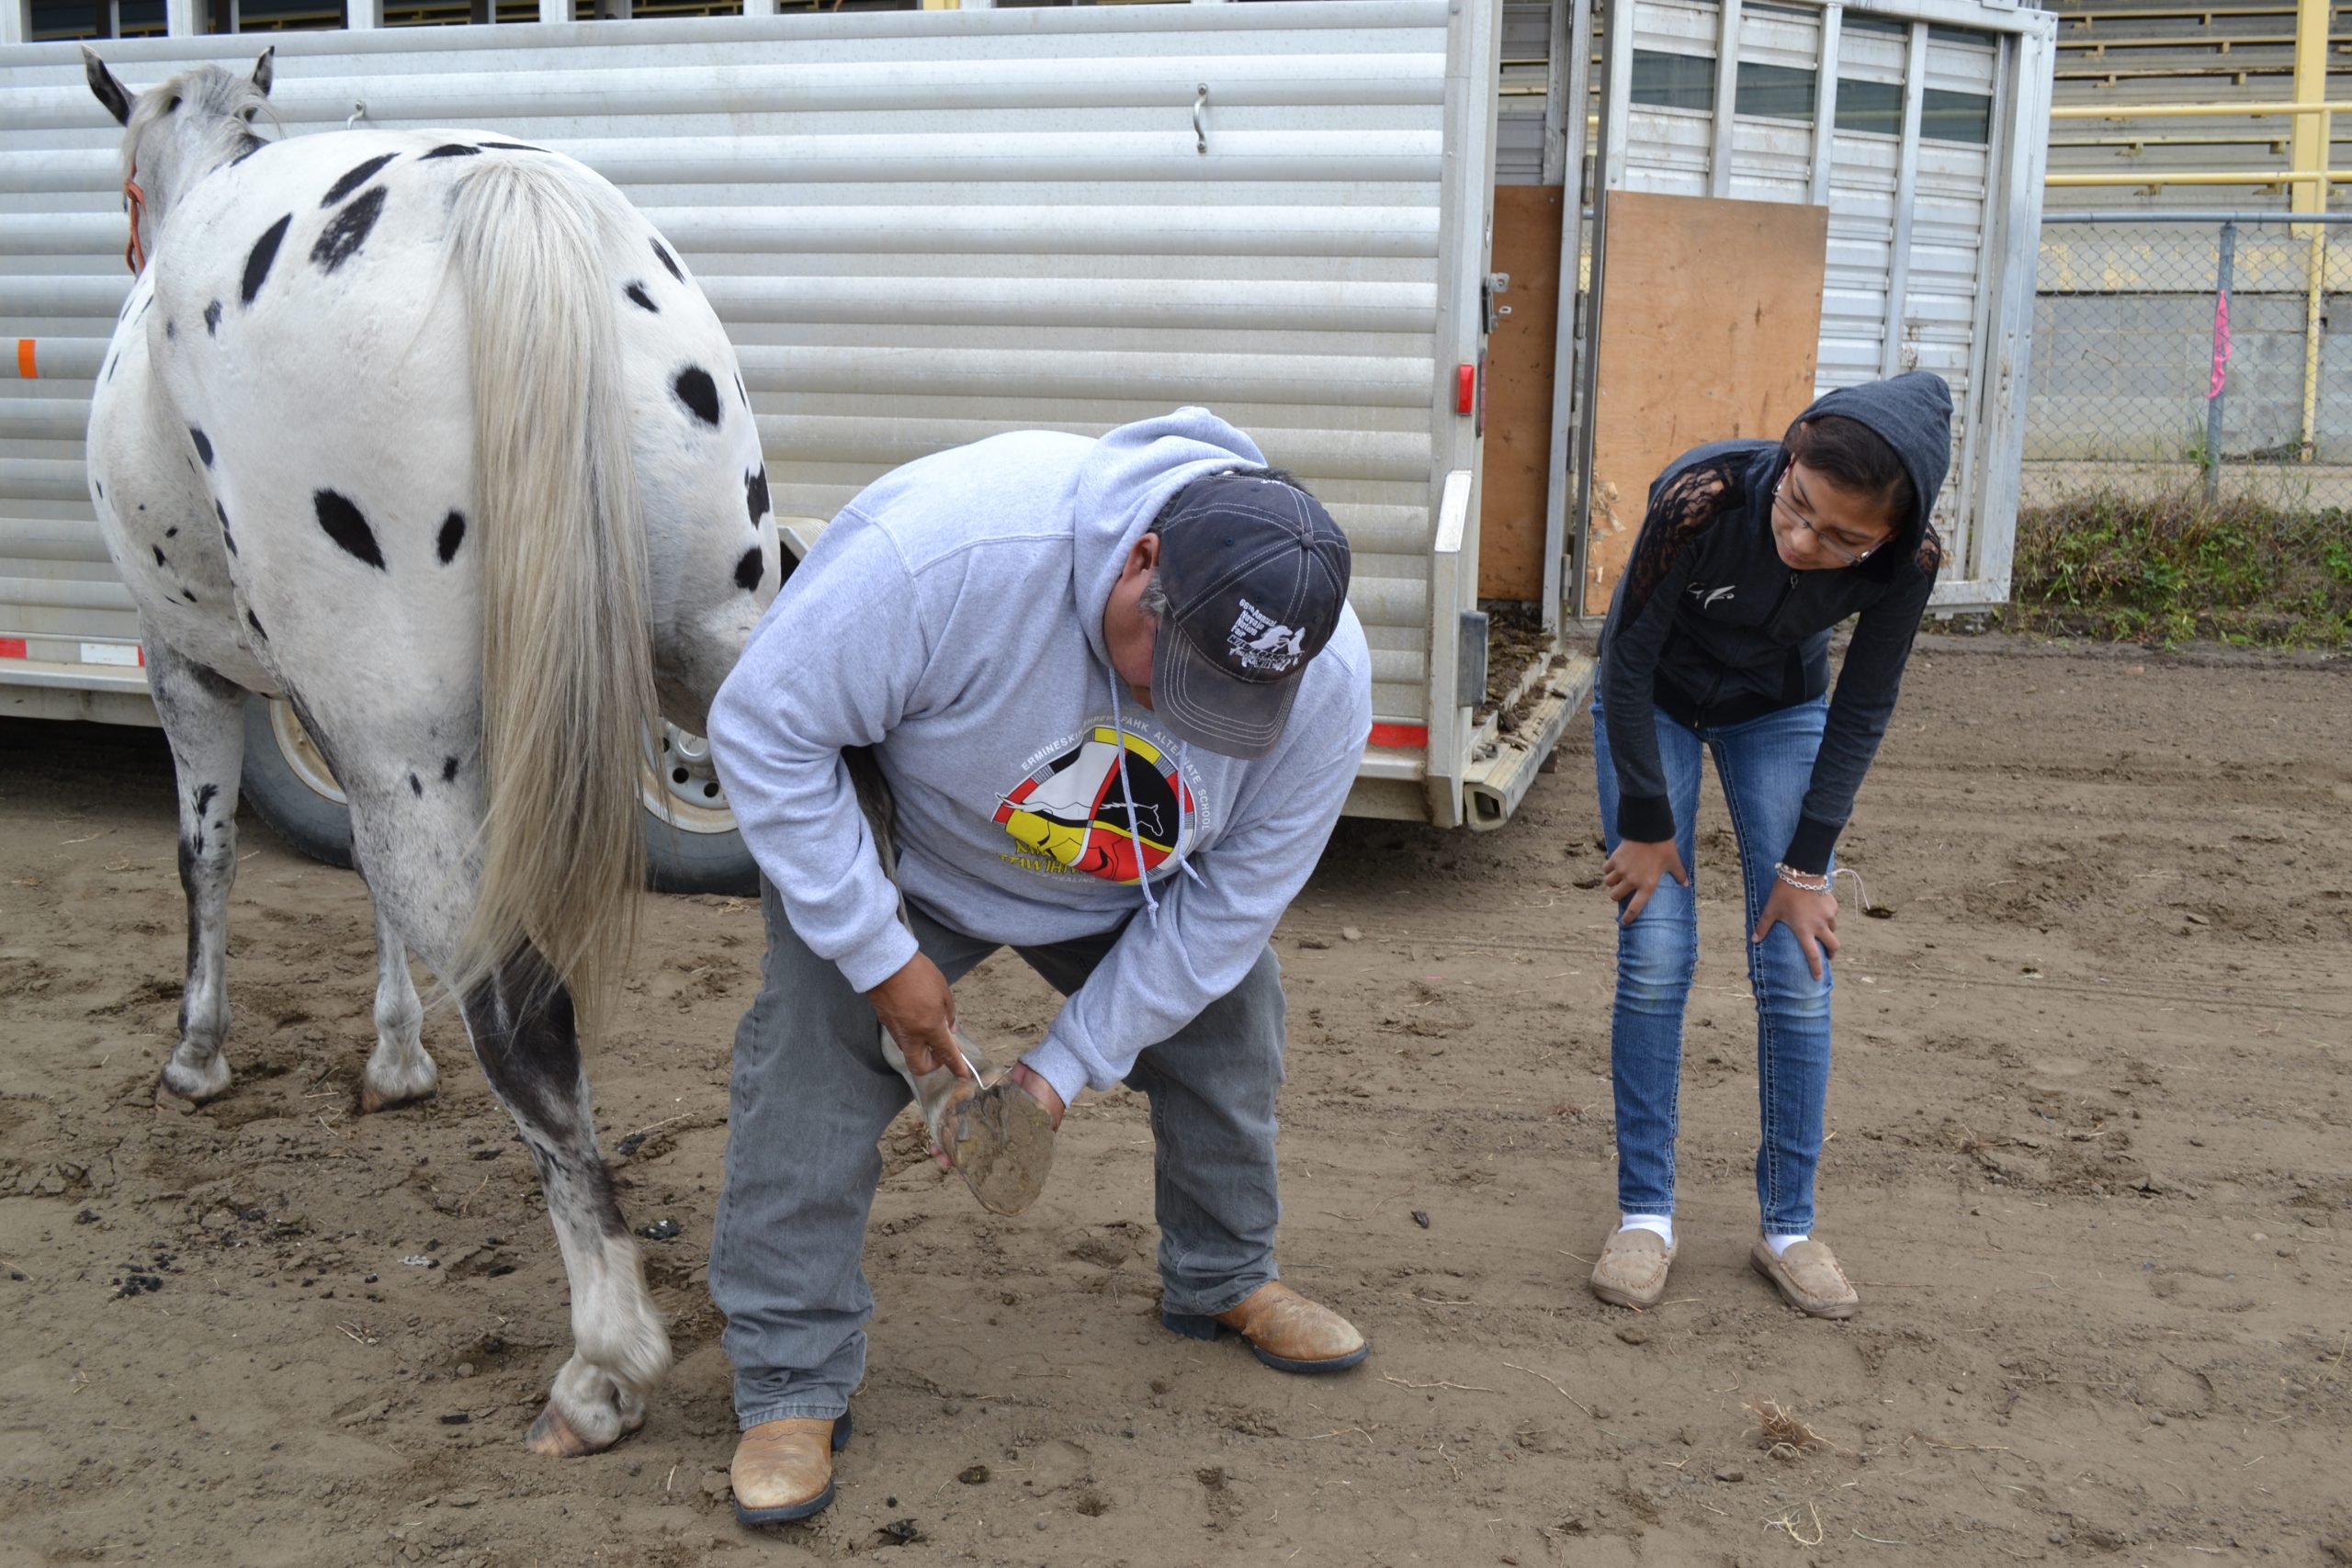 Warren Omeasoo shows Justise Wolf how to clean the hoofs of her horse. APTN/Photo